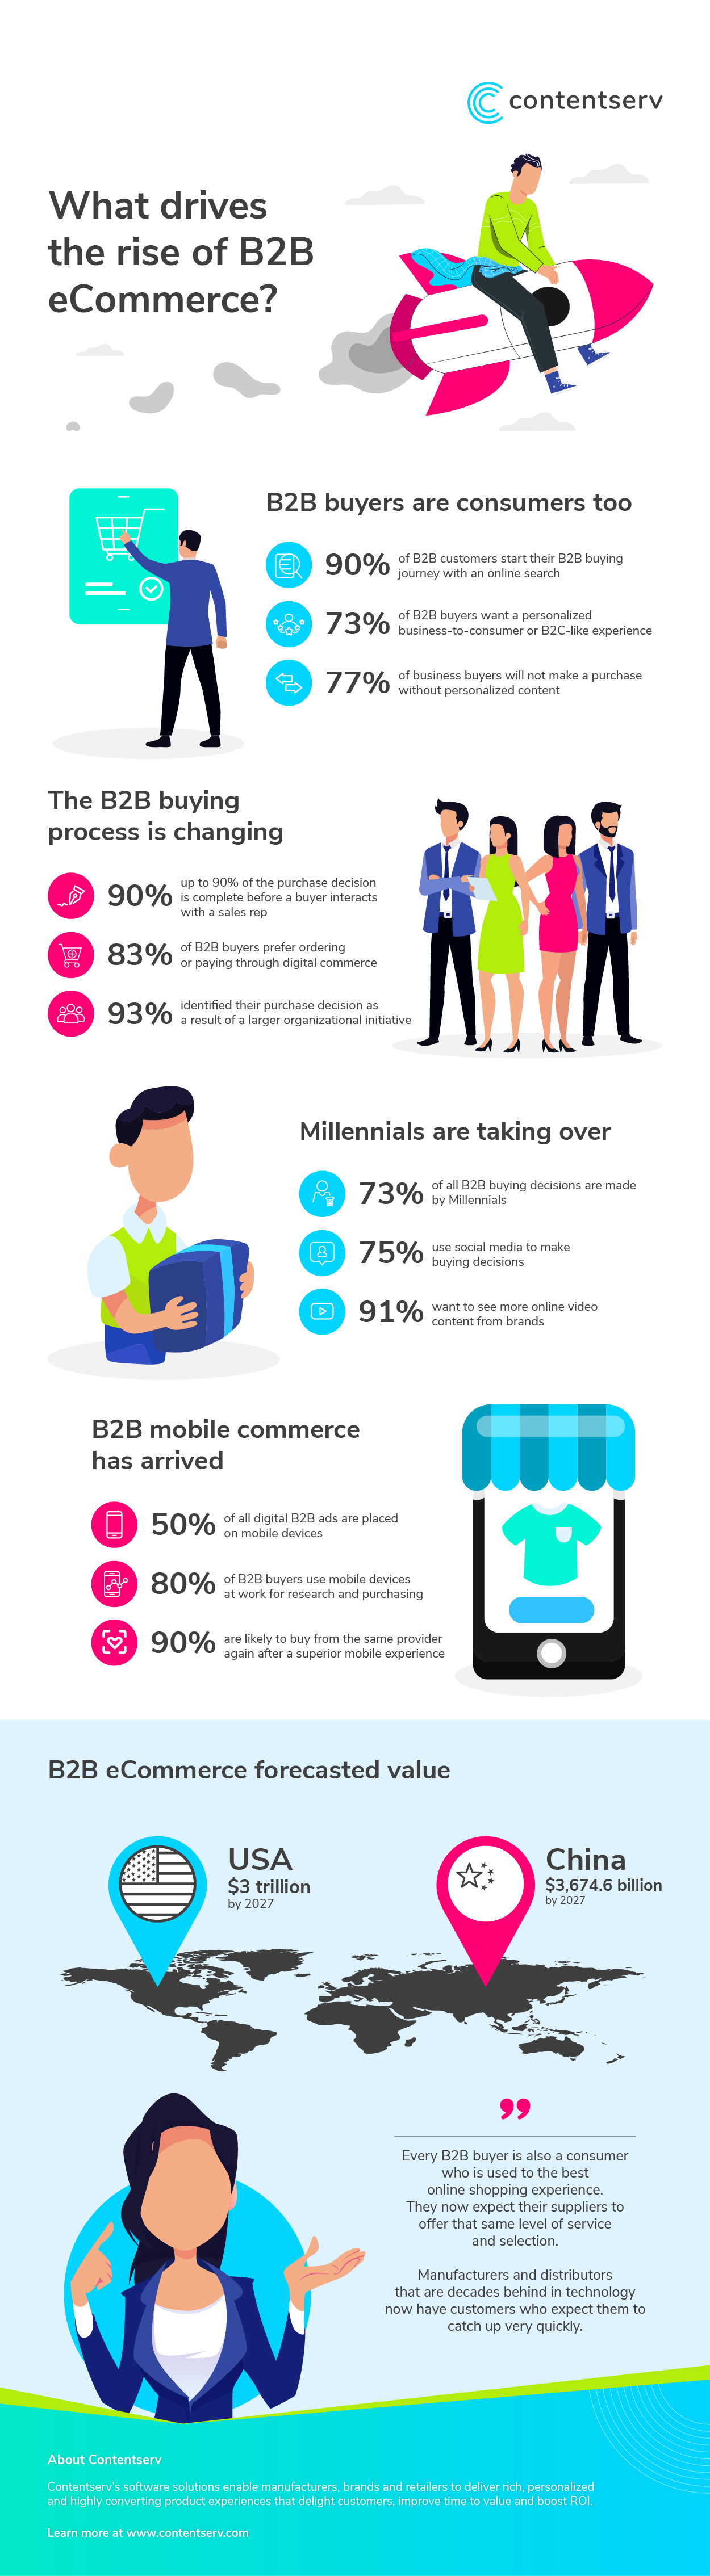 en-IG-What-Drives-the-Rise-of-the-B2B-E-Commerce-r02